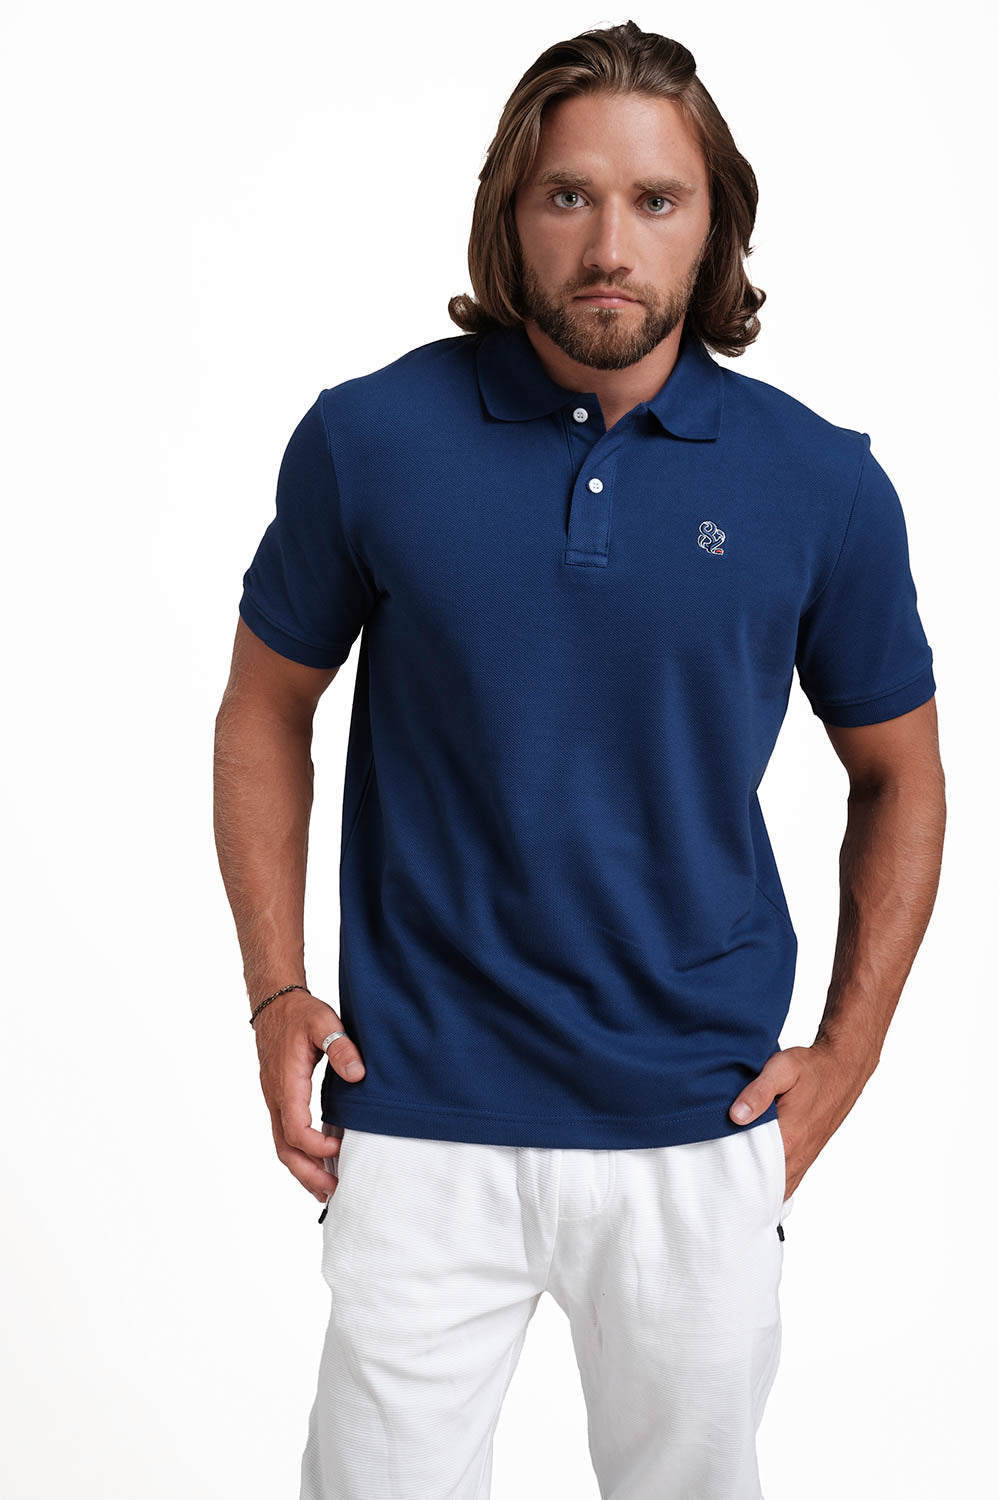 Polo Sky Blue T-shirts with Front Embroidery, Solid pique fabric